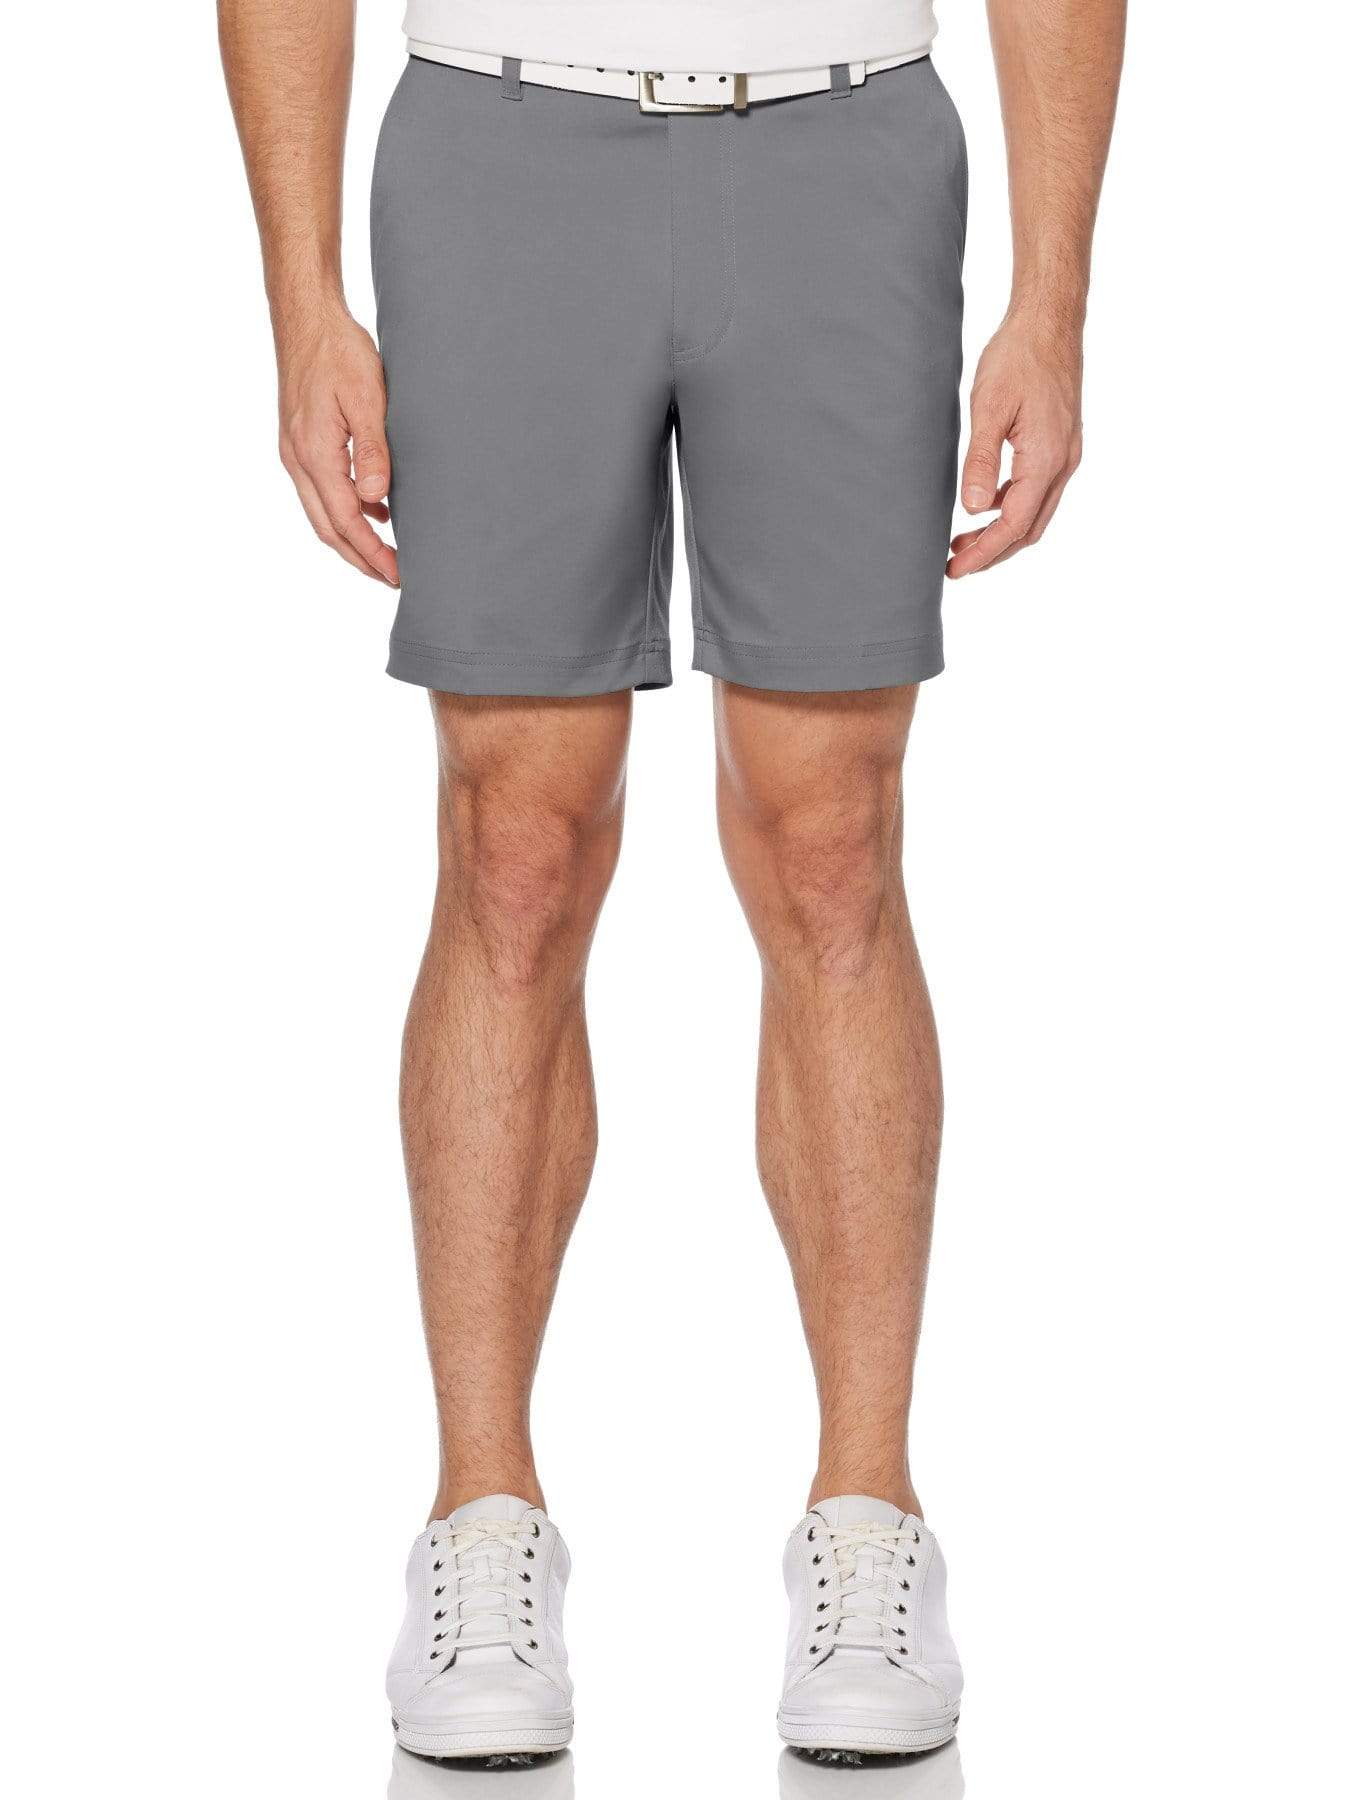 https://cdn.shopify.com/s/files/1/0377/9235/0347/products/Mens-7-Flat-Front-Golf-Short-with-Active-Waistband-Quiet-Shade-PGA-TOUR-Apparel.jpg?v=1709272339